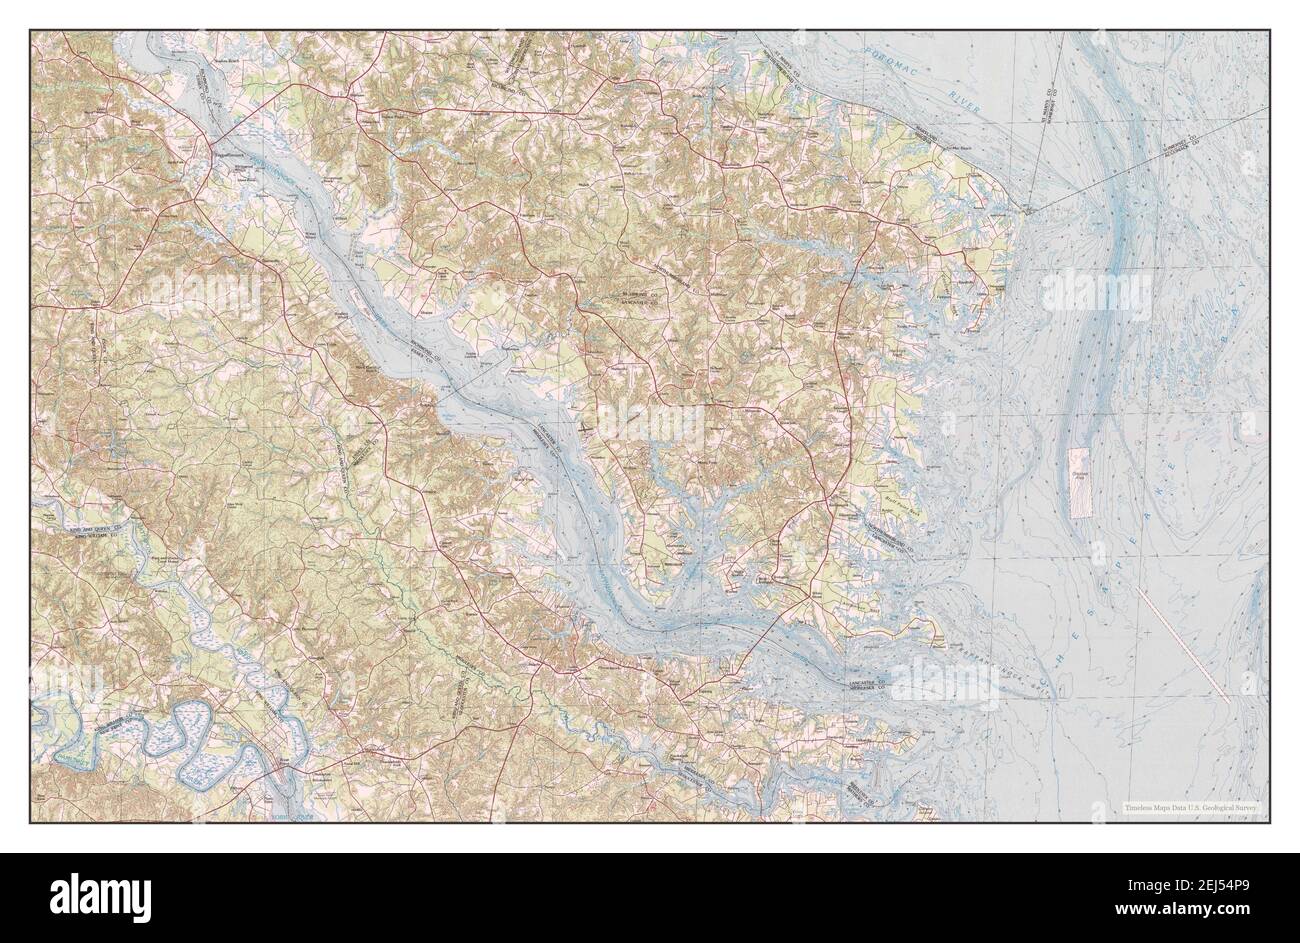 Tappahannock, Virginia, map 1984, 1:100000, United States of America by Timeless Maps, data U.S. Geological Survey Stock Photo